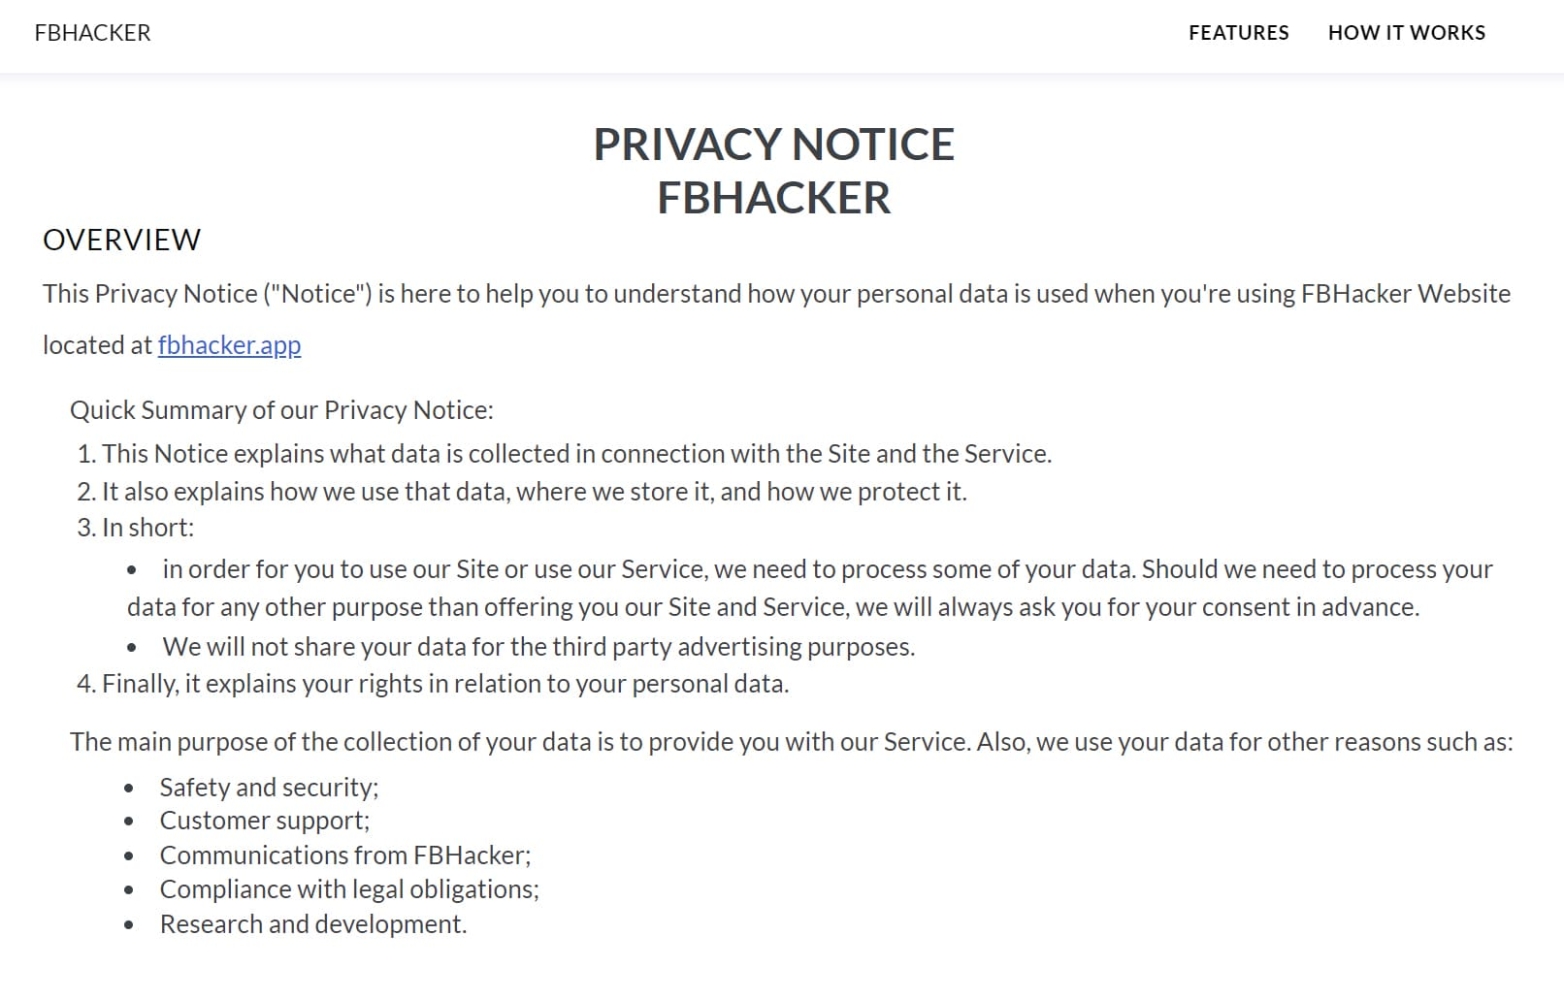 View on FBhacker website where privacy terms are described